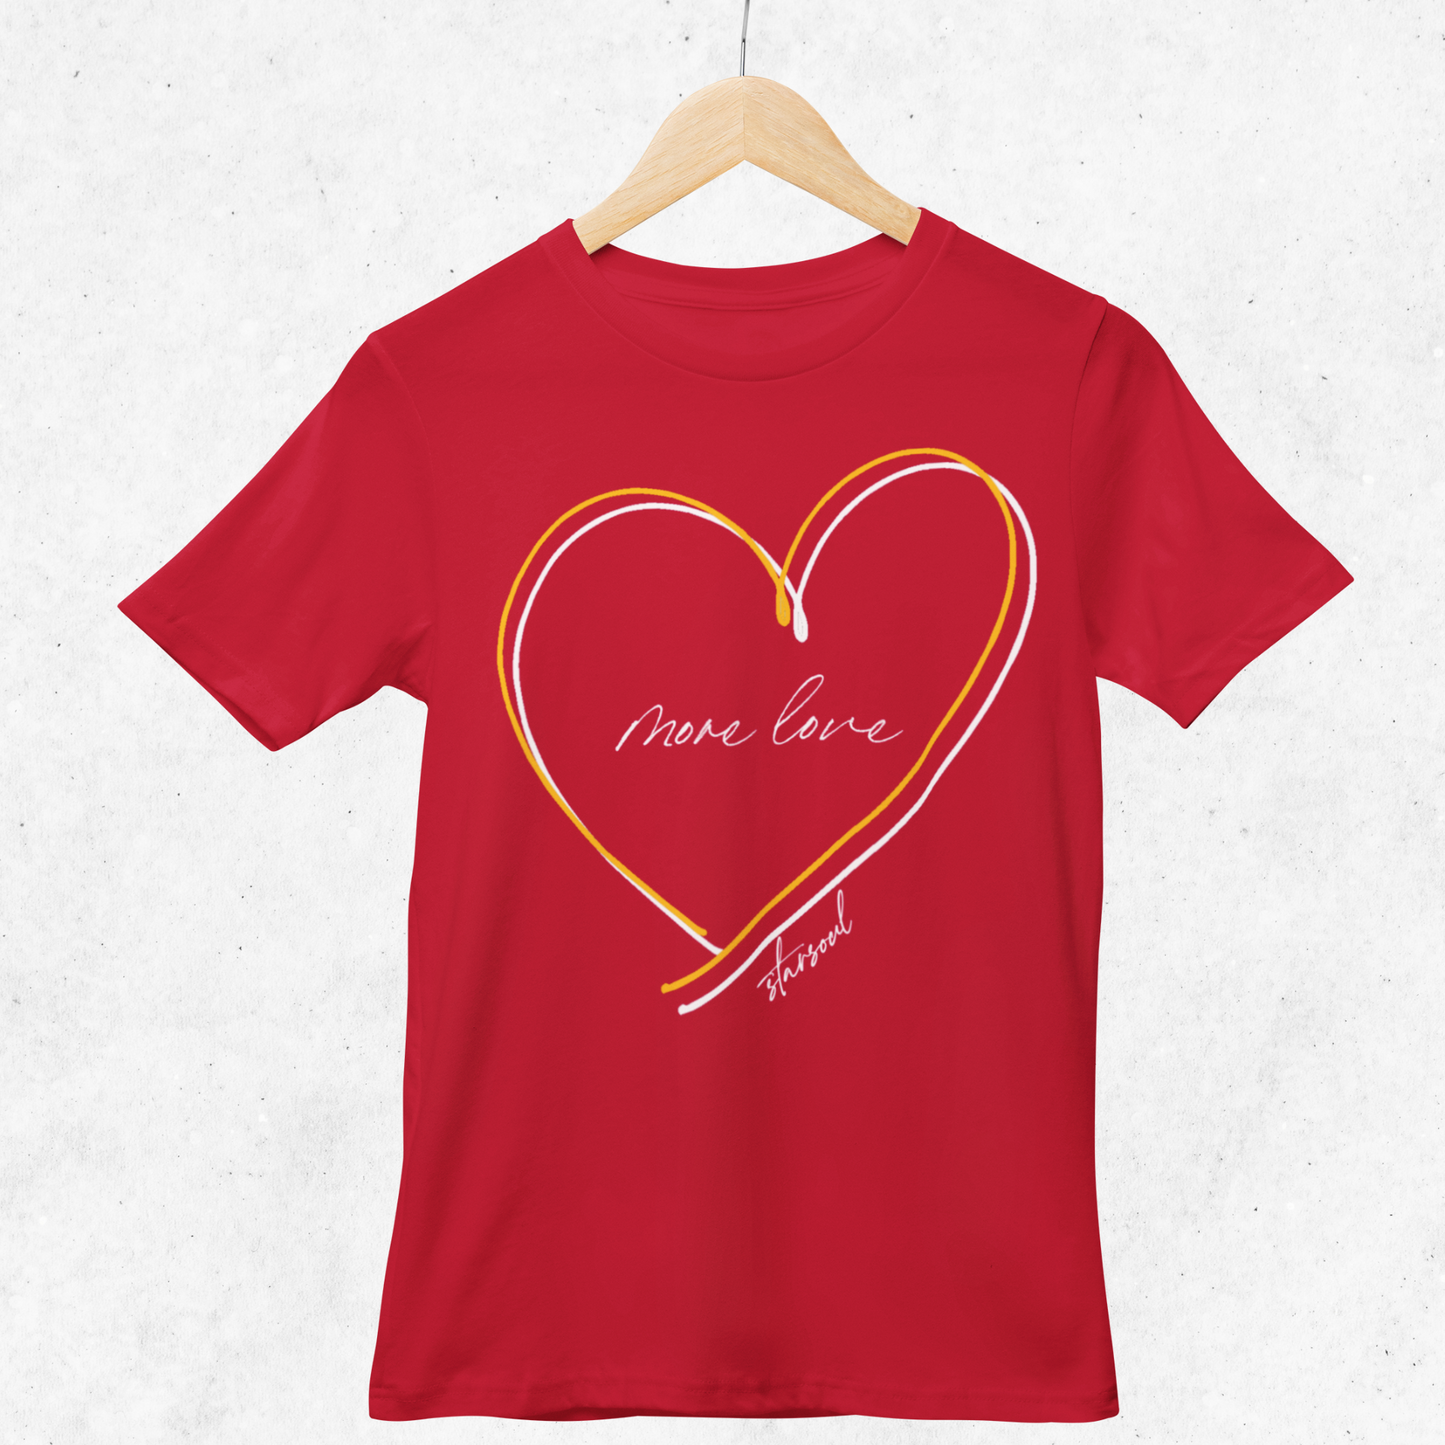 red shirt with yellow and white heart (text: more love).Every purchase from the #KCstrong collection donates 100% of the proceeds to the Kansas City Strong emergency fund created by the Chiefs and the United Way of Kansas City.